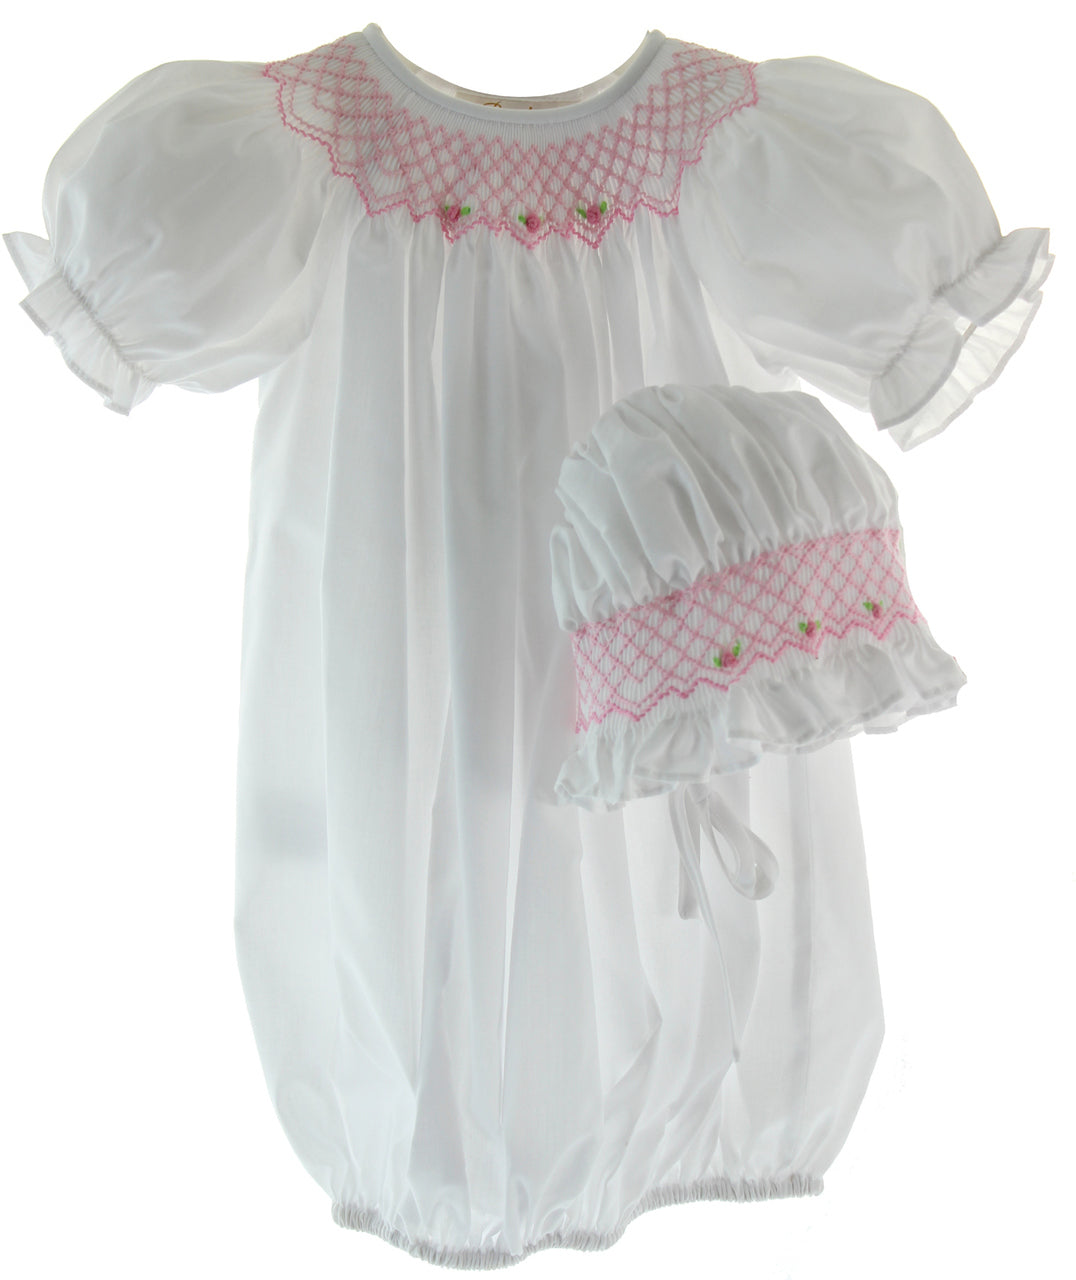 White Smocked Sacque with Bonnet